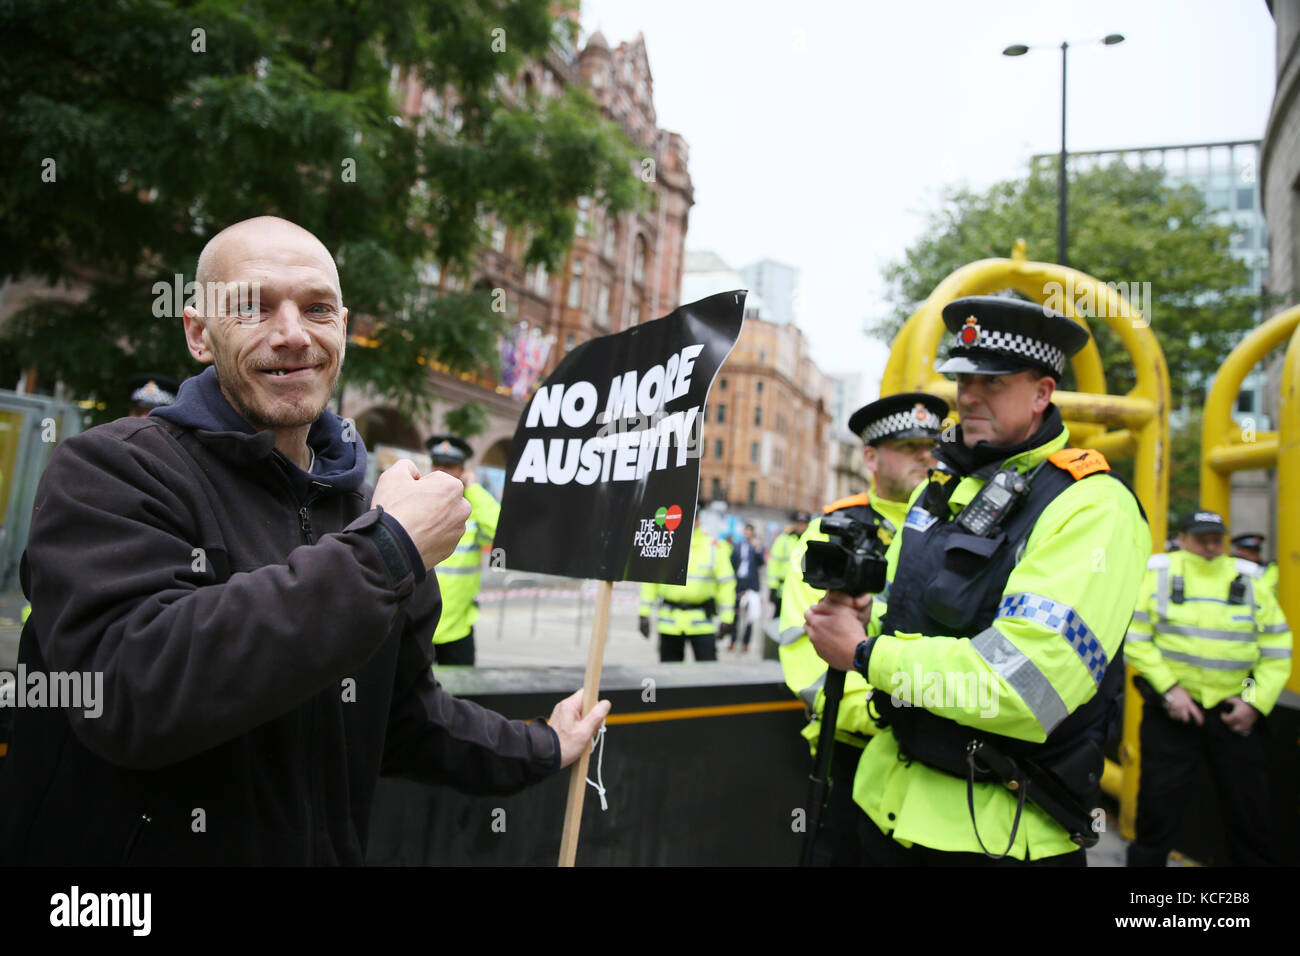 Manchester, UK. 4th Oct, 2017. A protester using a placard which reads 'No More Austerity' to block filming by Police evidence gatherers outside the Conservative Party Conference, Manchester,4th October, 2017 Credit: Barbara Cook/Alamy Live News Stock Photo